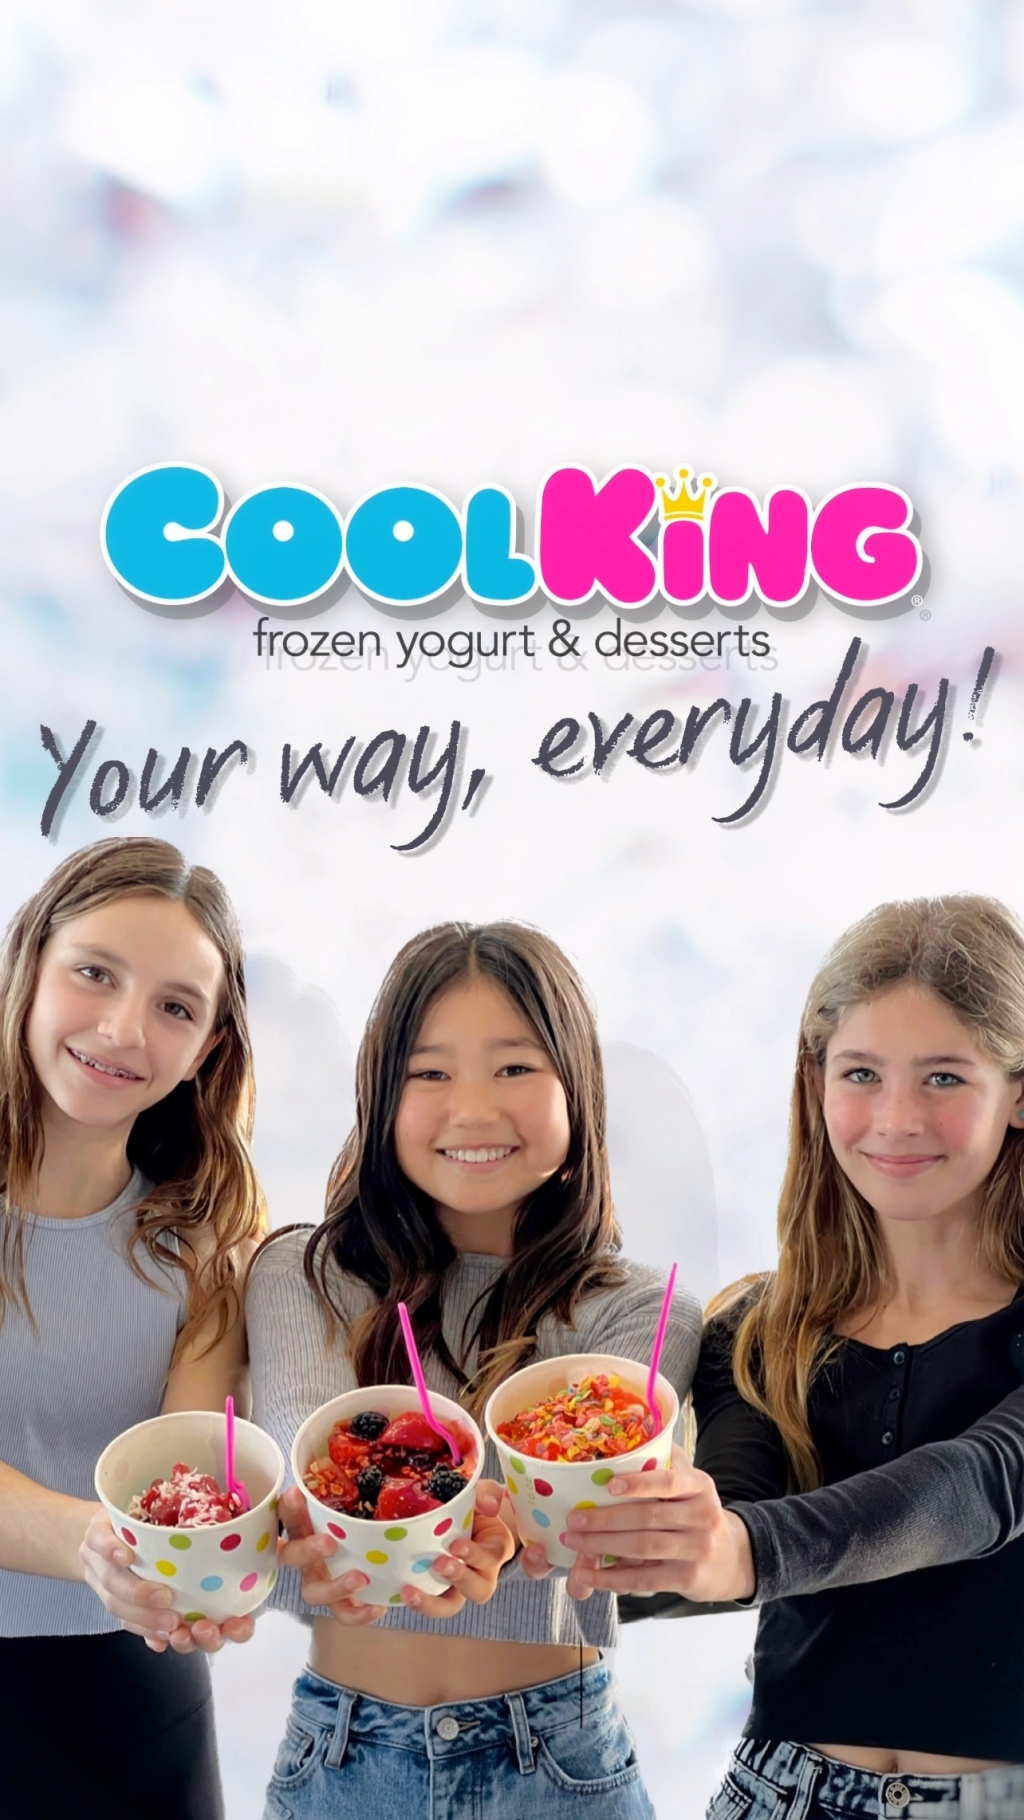 Cool King® “Your way, everyday!” Video Production